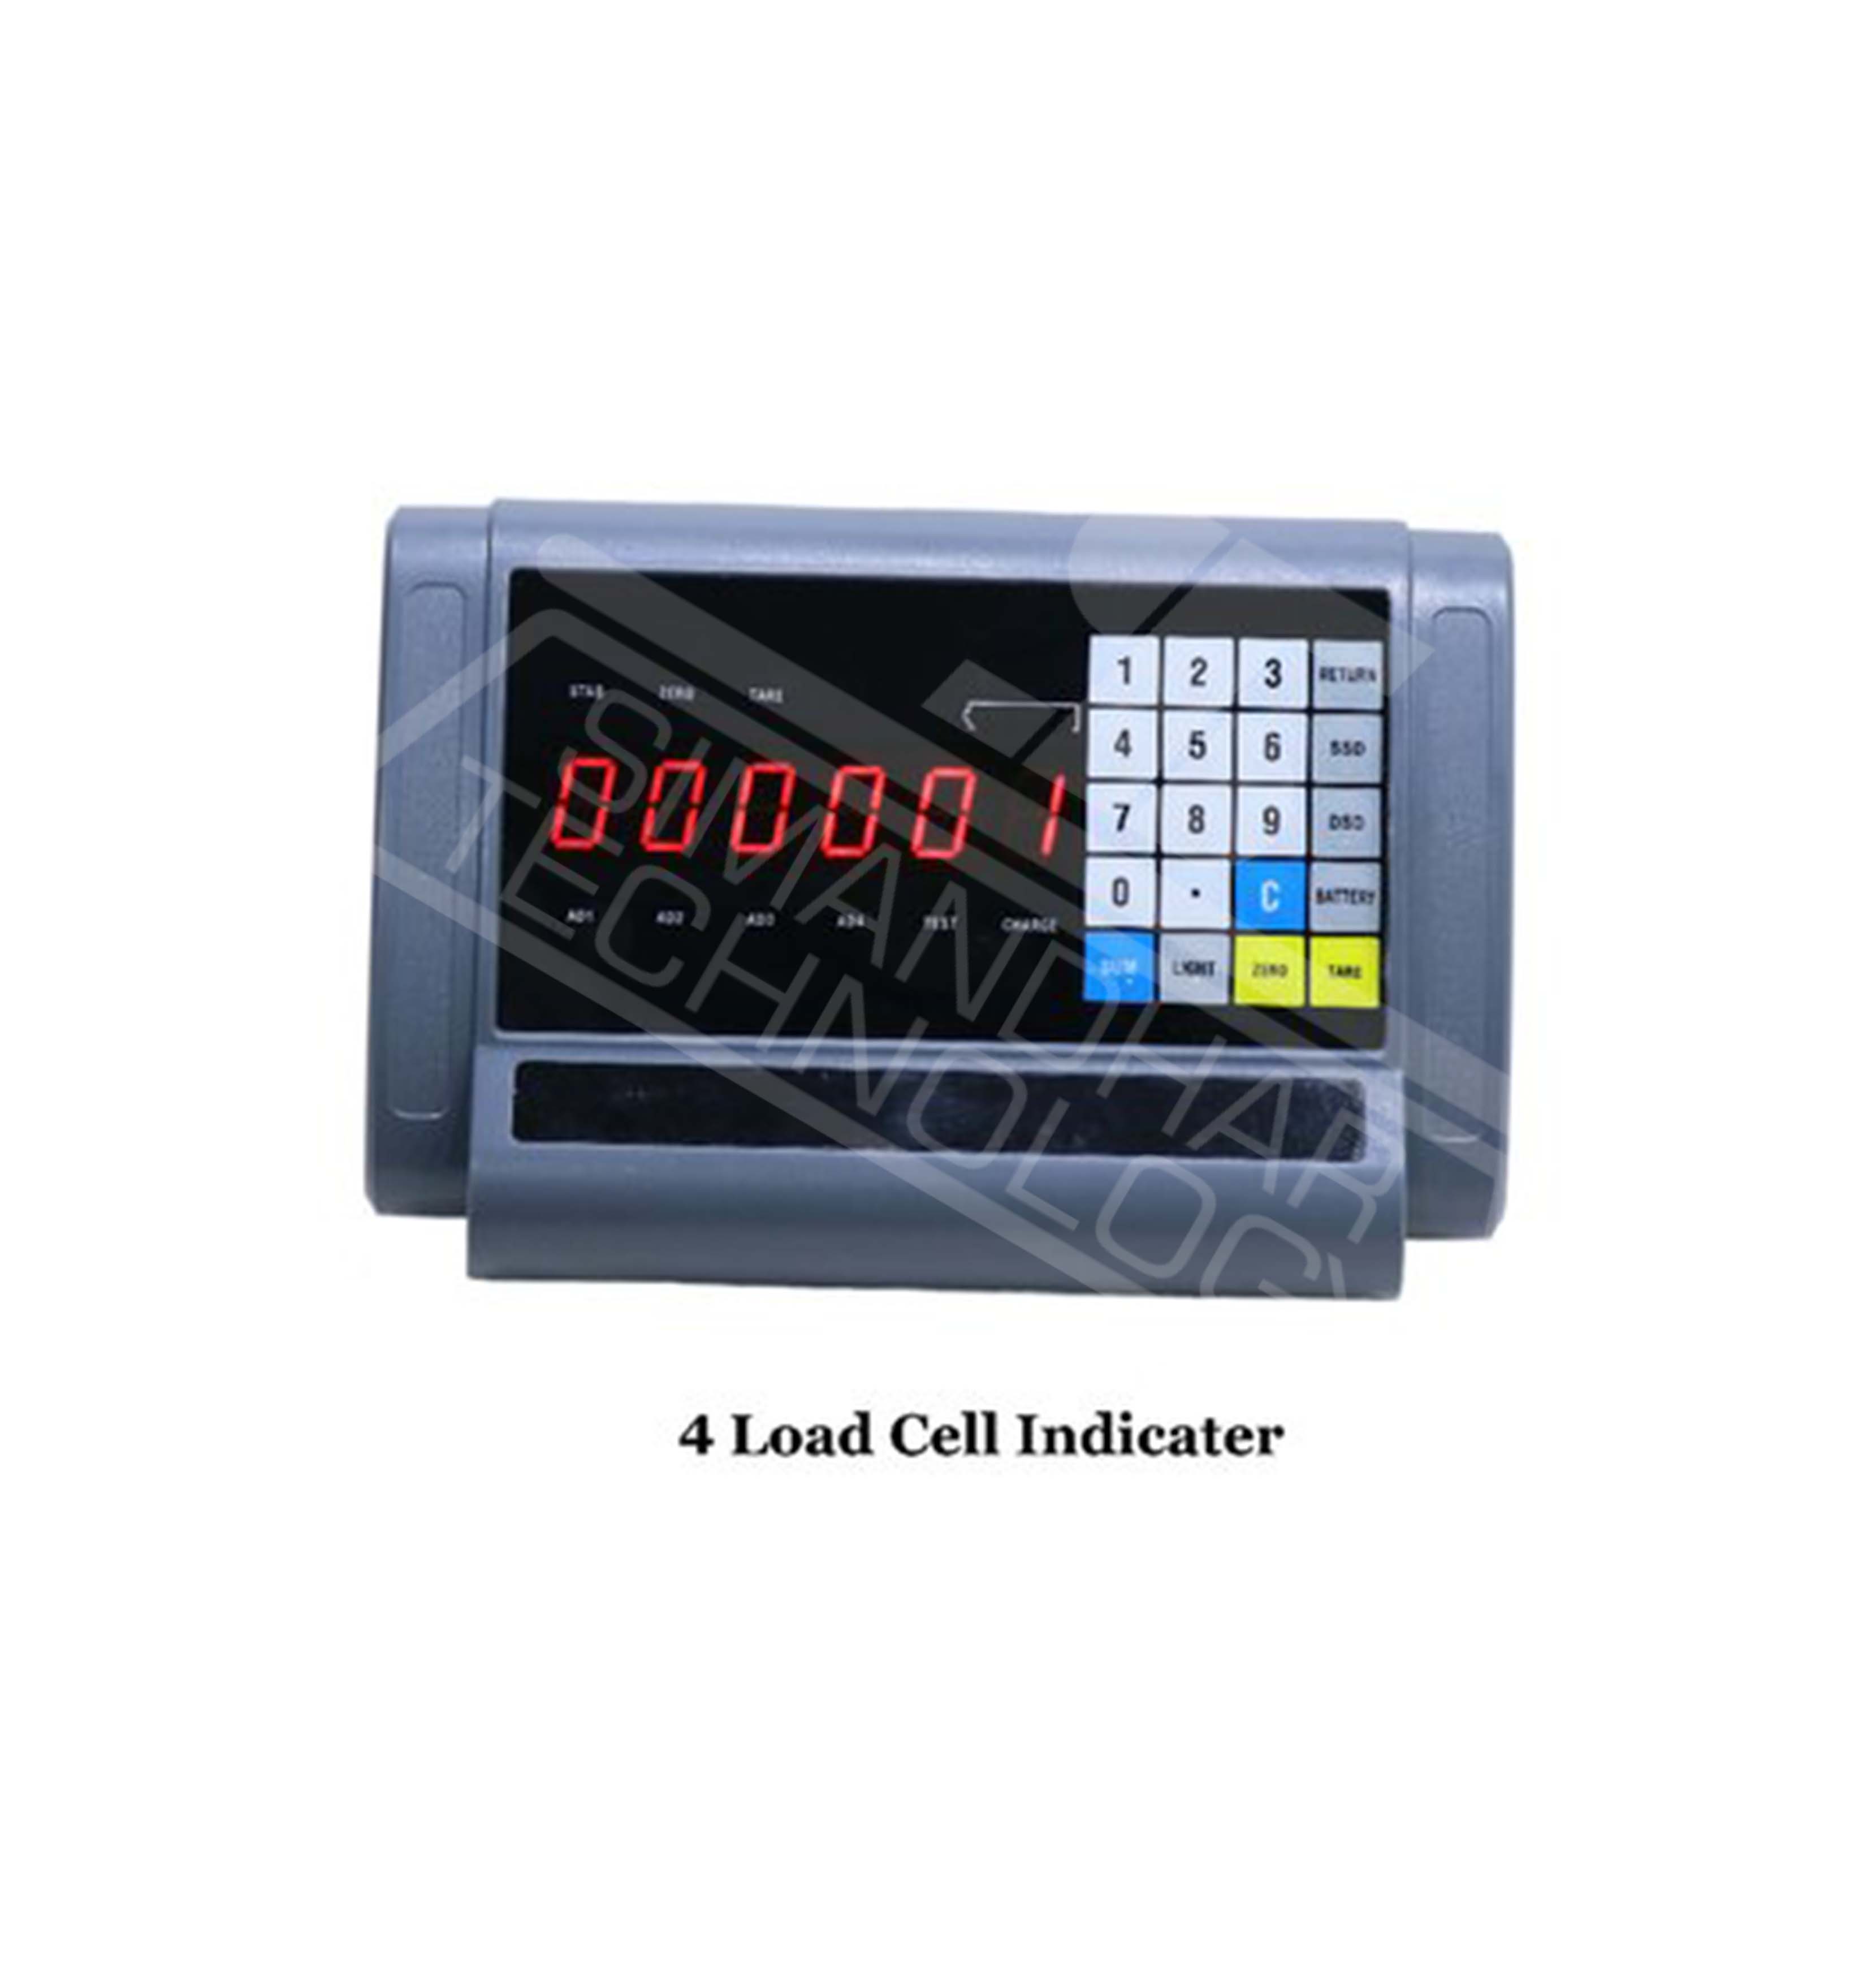 4 Load Cell Indicator